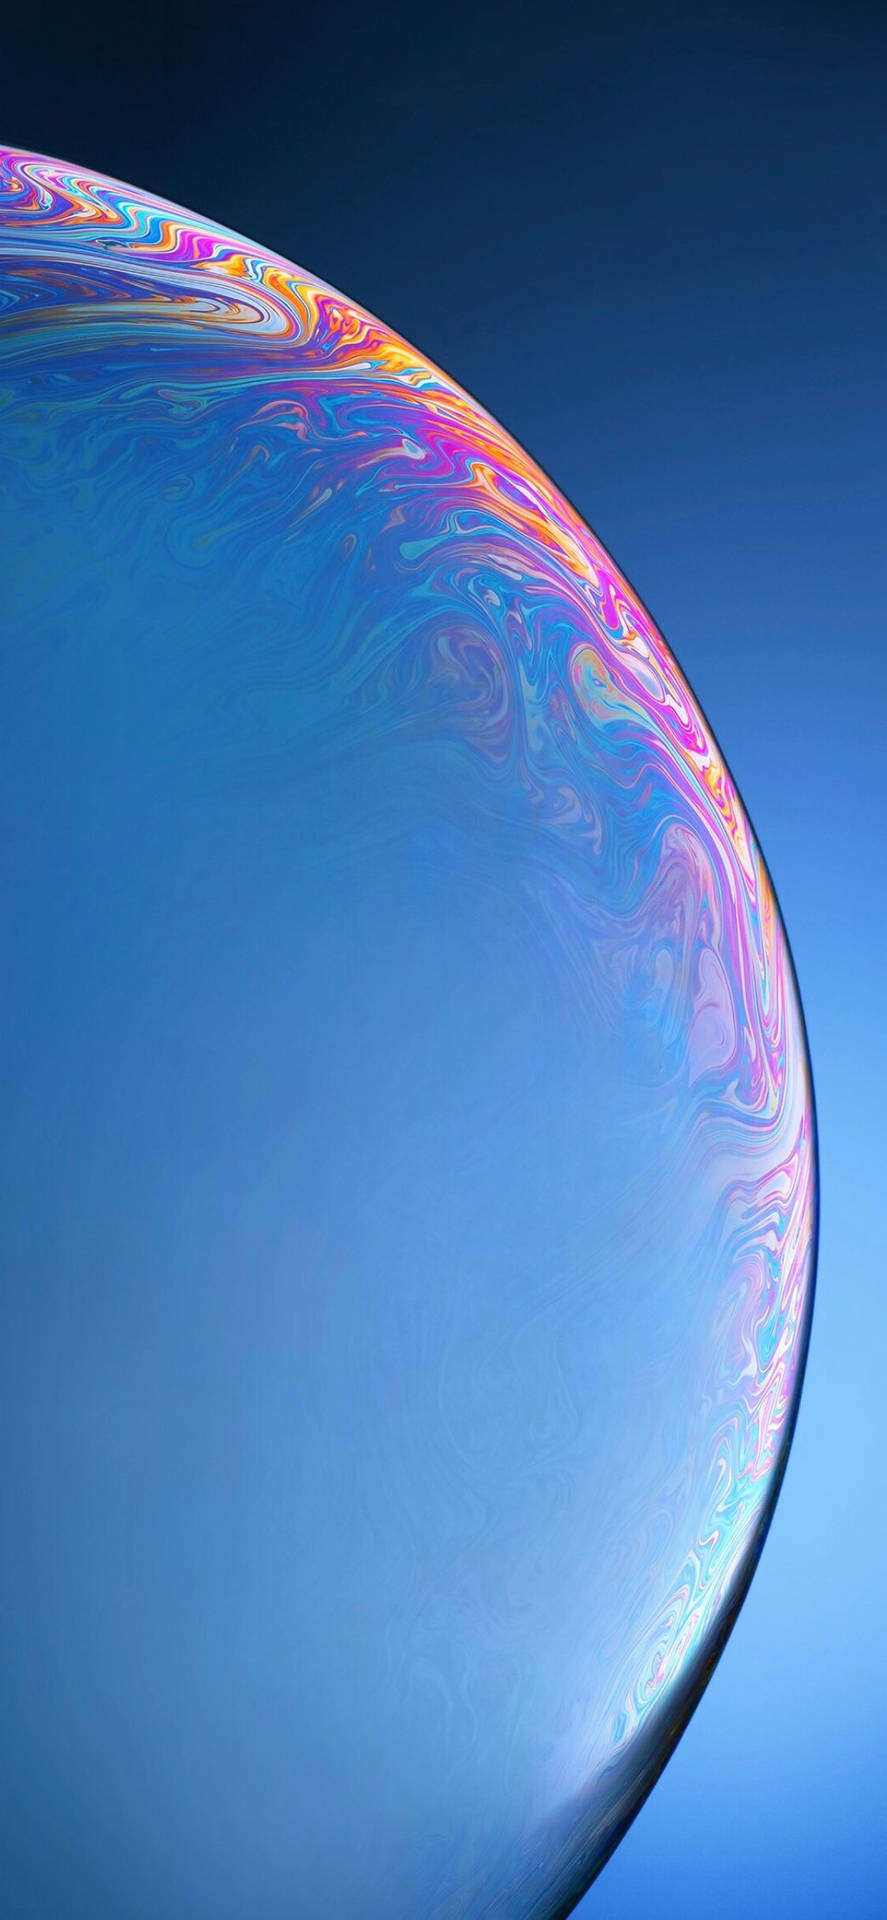 A Close Up Of A Blue Bubble With A Colorful Background Background